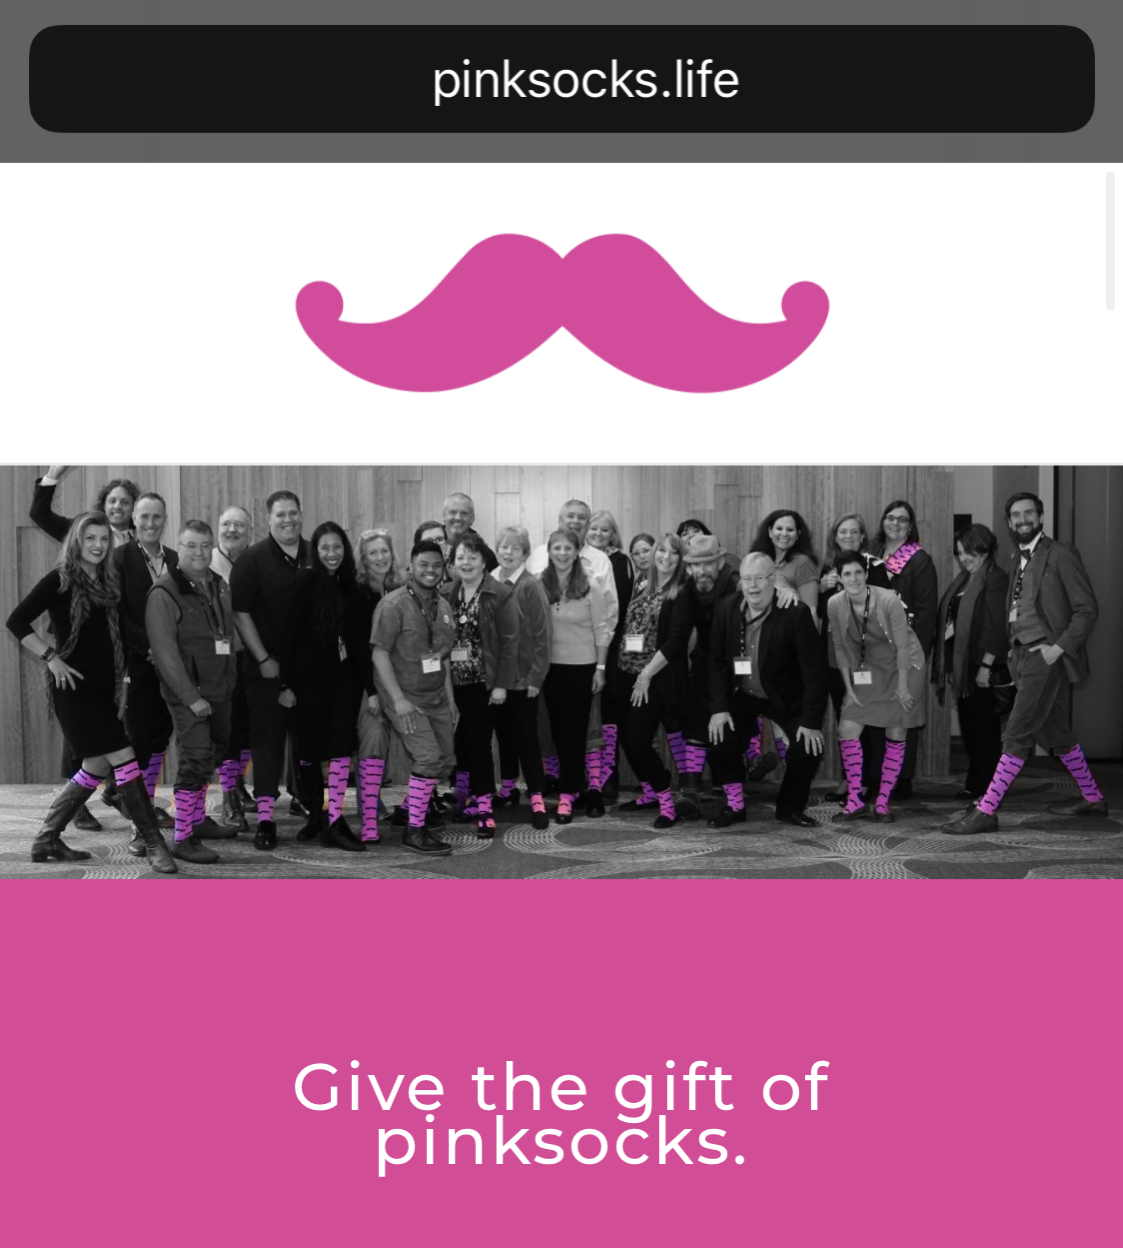 Lissanthea Taylor: She is a supporter of the pinksocks organisation, which believes in putting the human at the centre of healthcare.